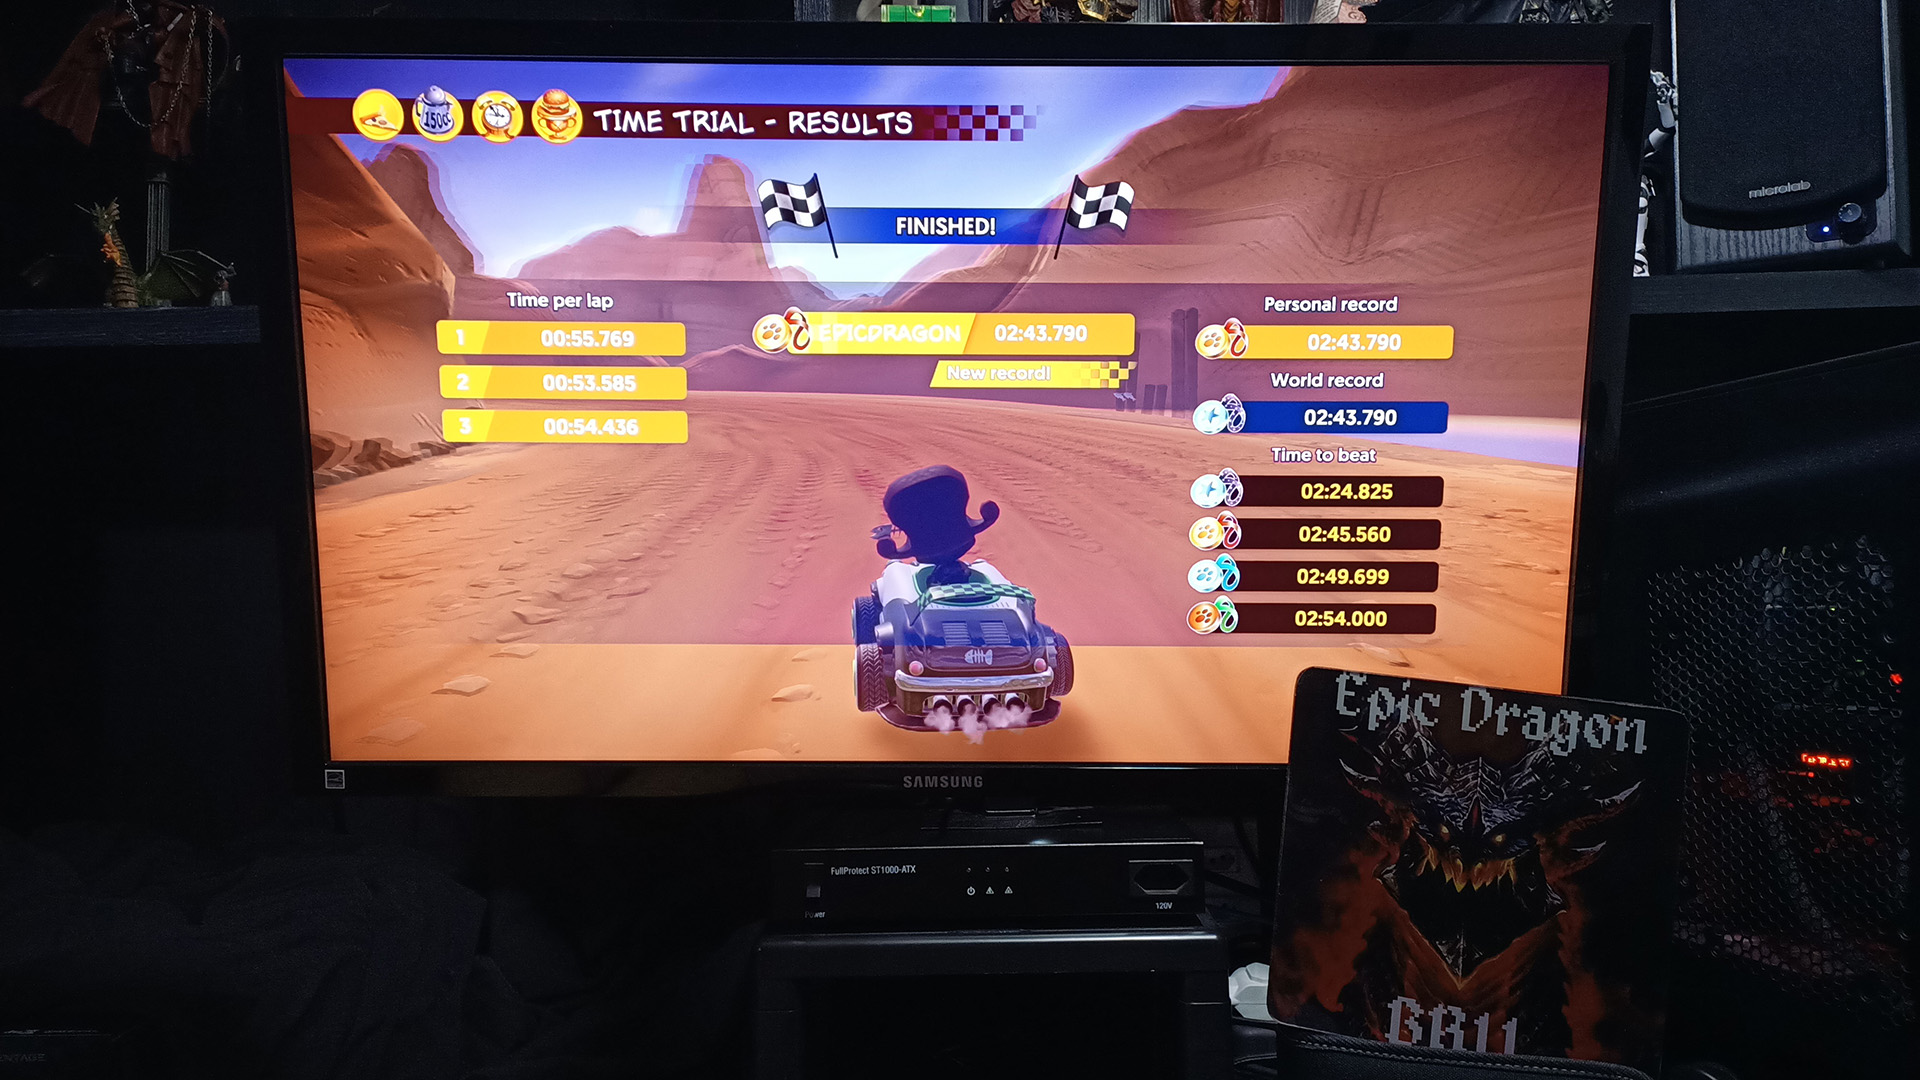 Garfield Kart Furious Racing: Blazing Oasis [Time Trial: Lap Time] time of 0:00:53.585